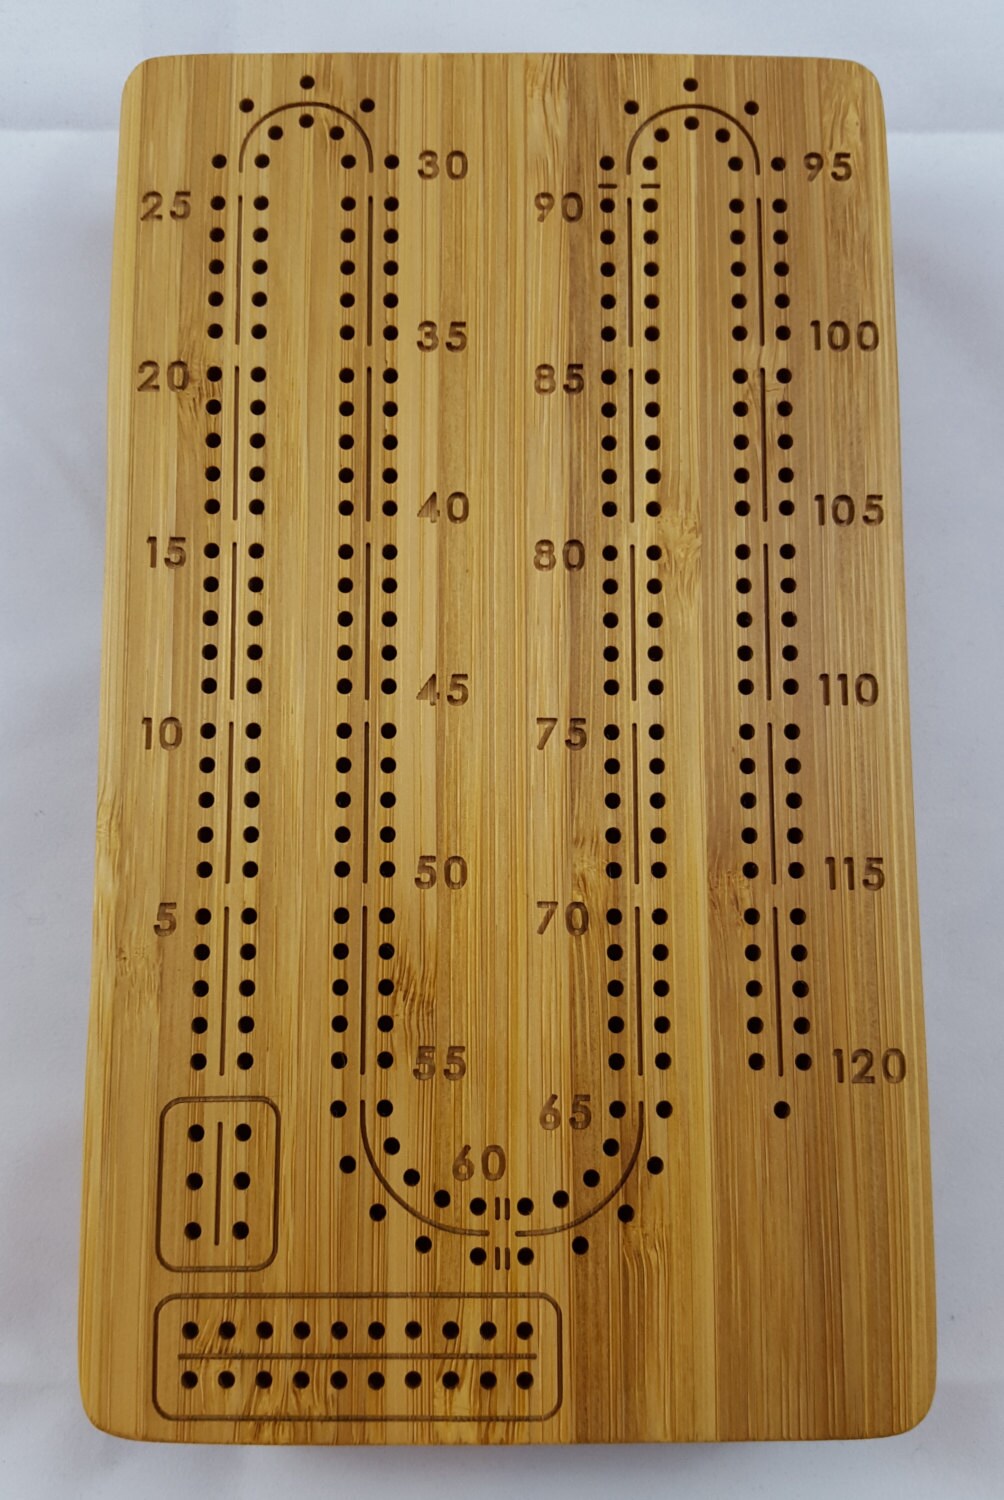 Portable 2 Player / Travel Cribbage Board with Pegs and Cards